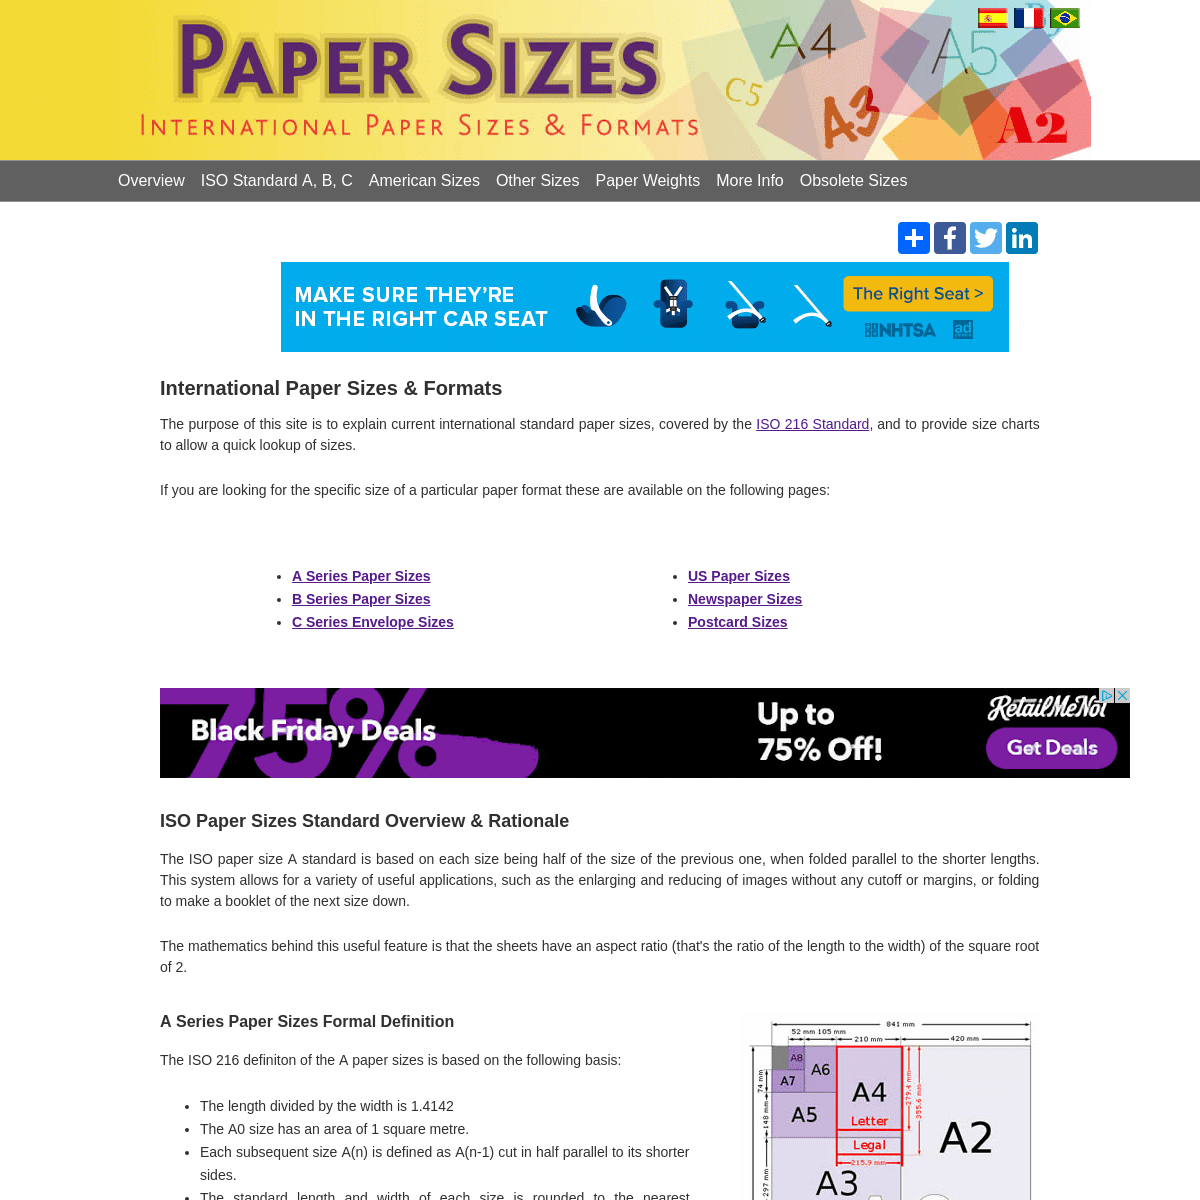 A complete backup of papersizes.org